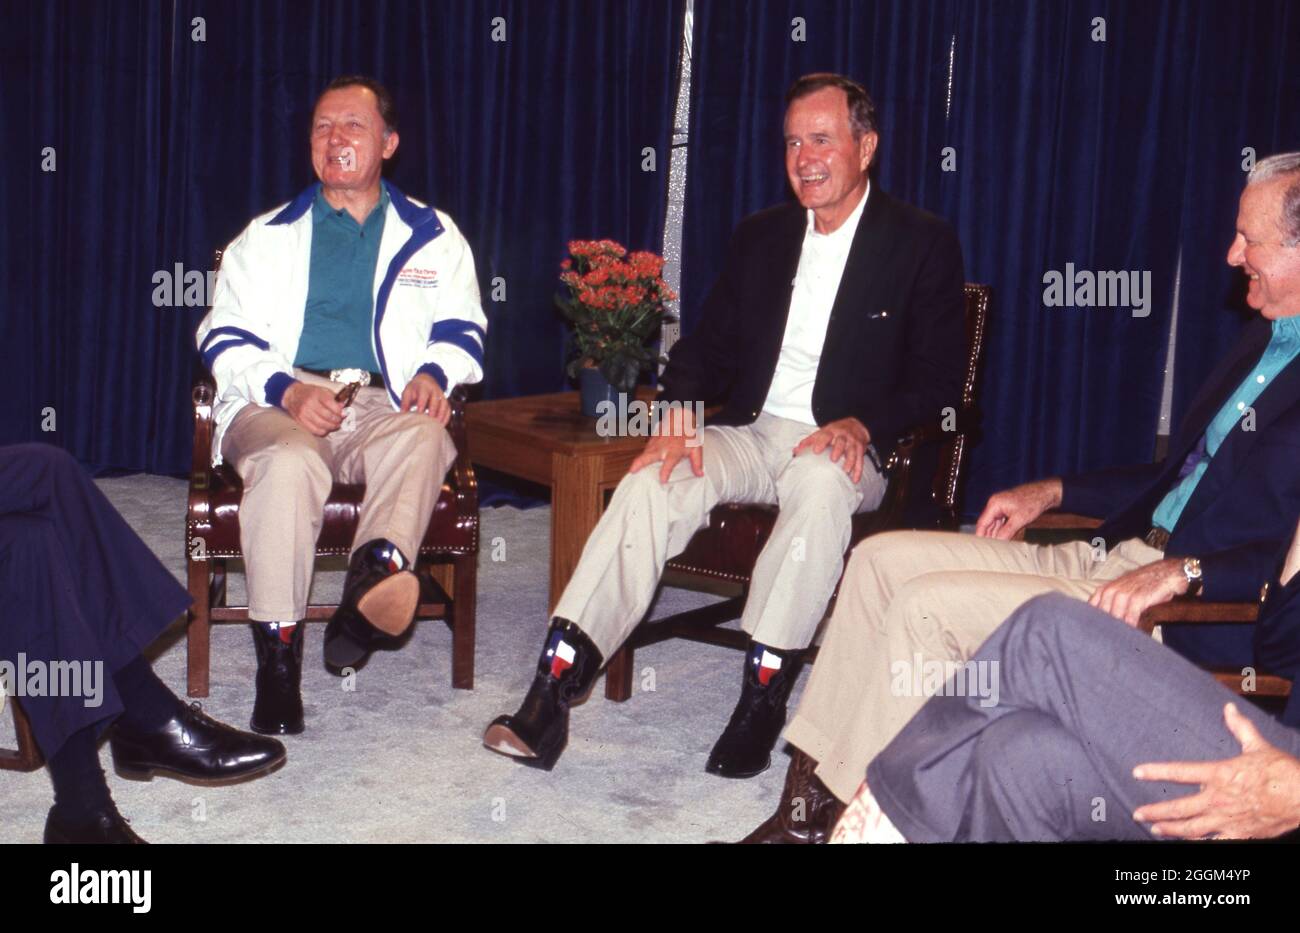 Houston Texas USA, July1990: U.S. President George H.W. Bush shows off his Texas-themed cowboy boots during an informal event with other world leaders during the Houston Economic Summit of Industrialized Nations. ©Bob Daemmrich Stock Photo